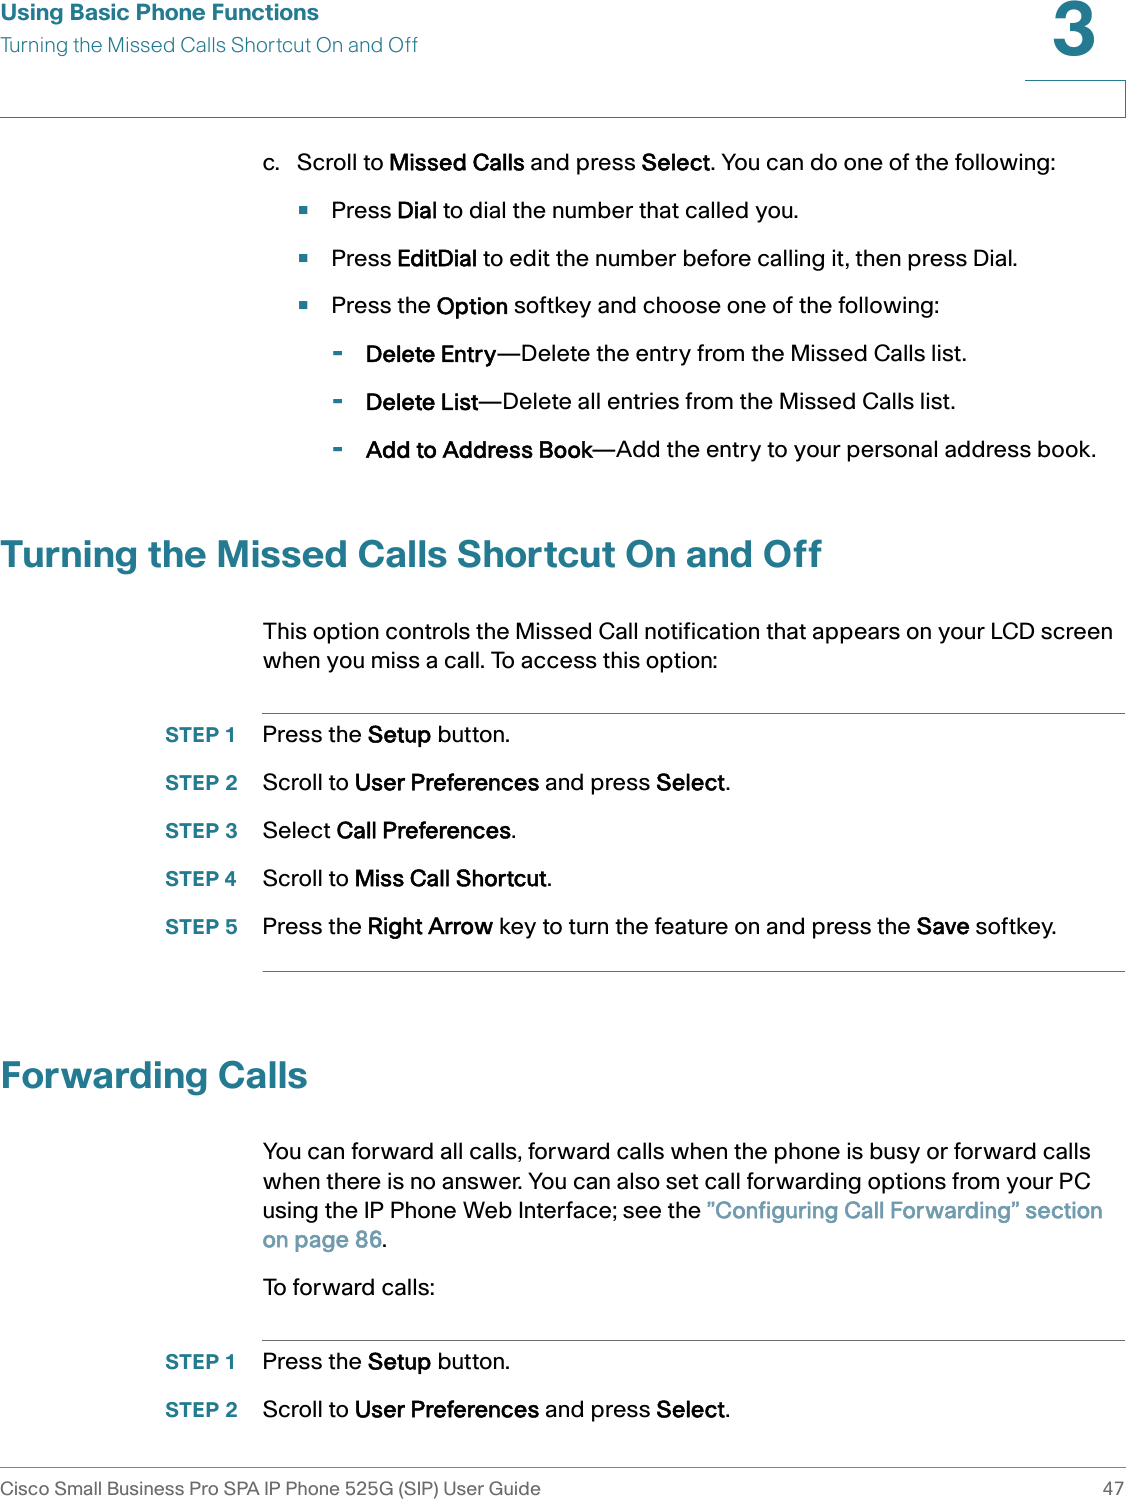 Using Basic Phone FunctionsTurning the Missed Calls Shortcut On and OffCisco Small Business Pro SPA IP Phone 525G (SIP) User Guide 473 c. Scroll to Missed Calls and press Select. You can do one of the following:•Press Dial to dial the number that called you.•Press EditDial to edit the number before calling it, then press Dial.•Press the Option softkey and choose one of the following:-Delete Entry—Delete the entry from the Missed Calls list.-Delete List—Delete all entries from the Missed Calls list.-Add to Address Book—Add the entry to your personal address book.Turning the Missed Calls Shortcut On and OffThis option controls the Missed Call notification that appears on your LCD screen when you miss a call. To access this option:STEP 1 Press the Setup button.STEP 2 Scroll to User Preferences and press Select.STEP 3 Select Call Preferences.STEP 4 Scroll to Miss Call Shortcut.STEP 5 Press the Right Arrow key to turn the feature on and press the Save softkey.Forwarding CallsYou can forward all calls, forward calls when the phone is busy or forward calls when there is no answer. You can also set call forwarding options from your PC using the IP Phone Web Interface; see the ”Configuring Call Forwarding” section on page 86.To forward calls:STEP 1 Press the Setup button.STEP 2 Scroll to User Preferences and press Select.